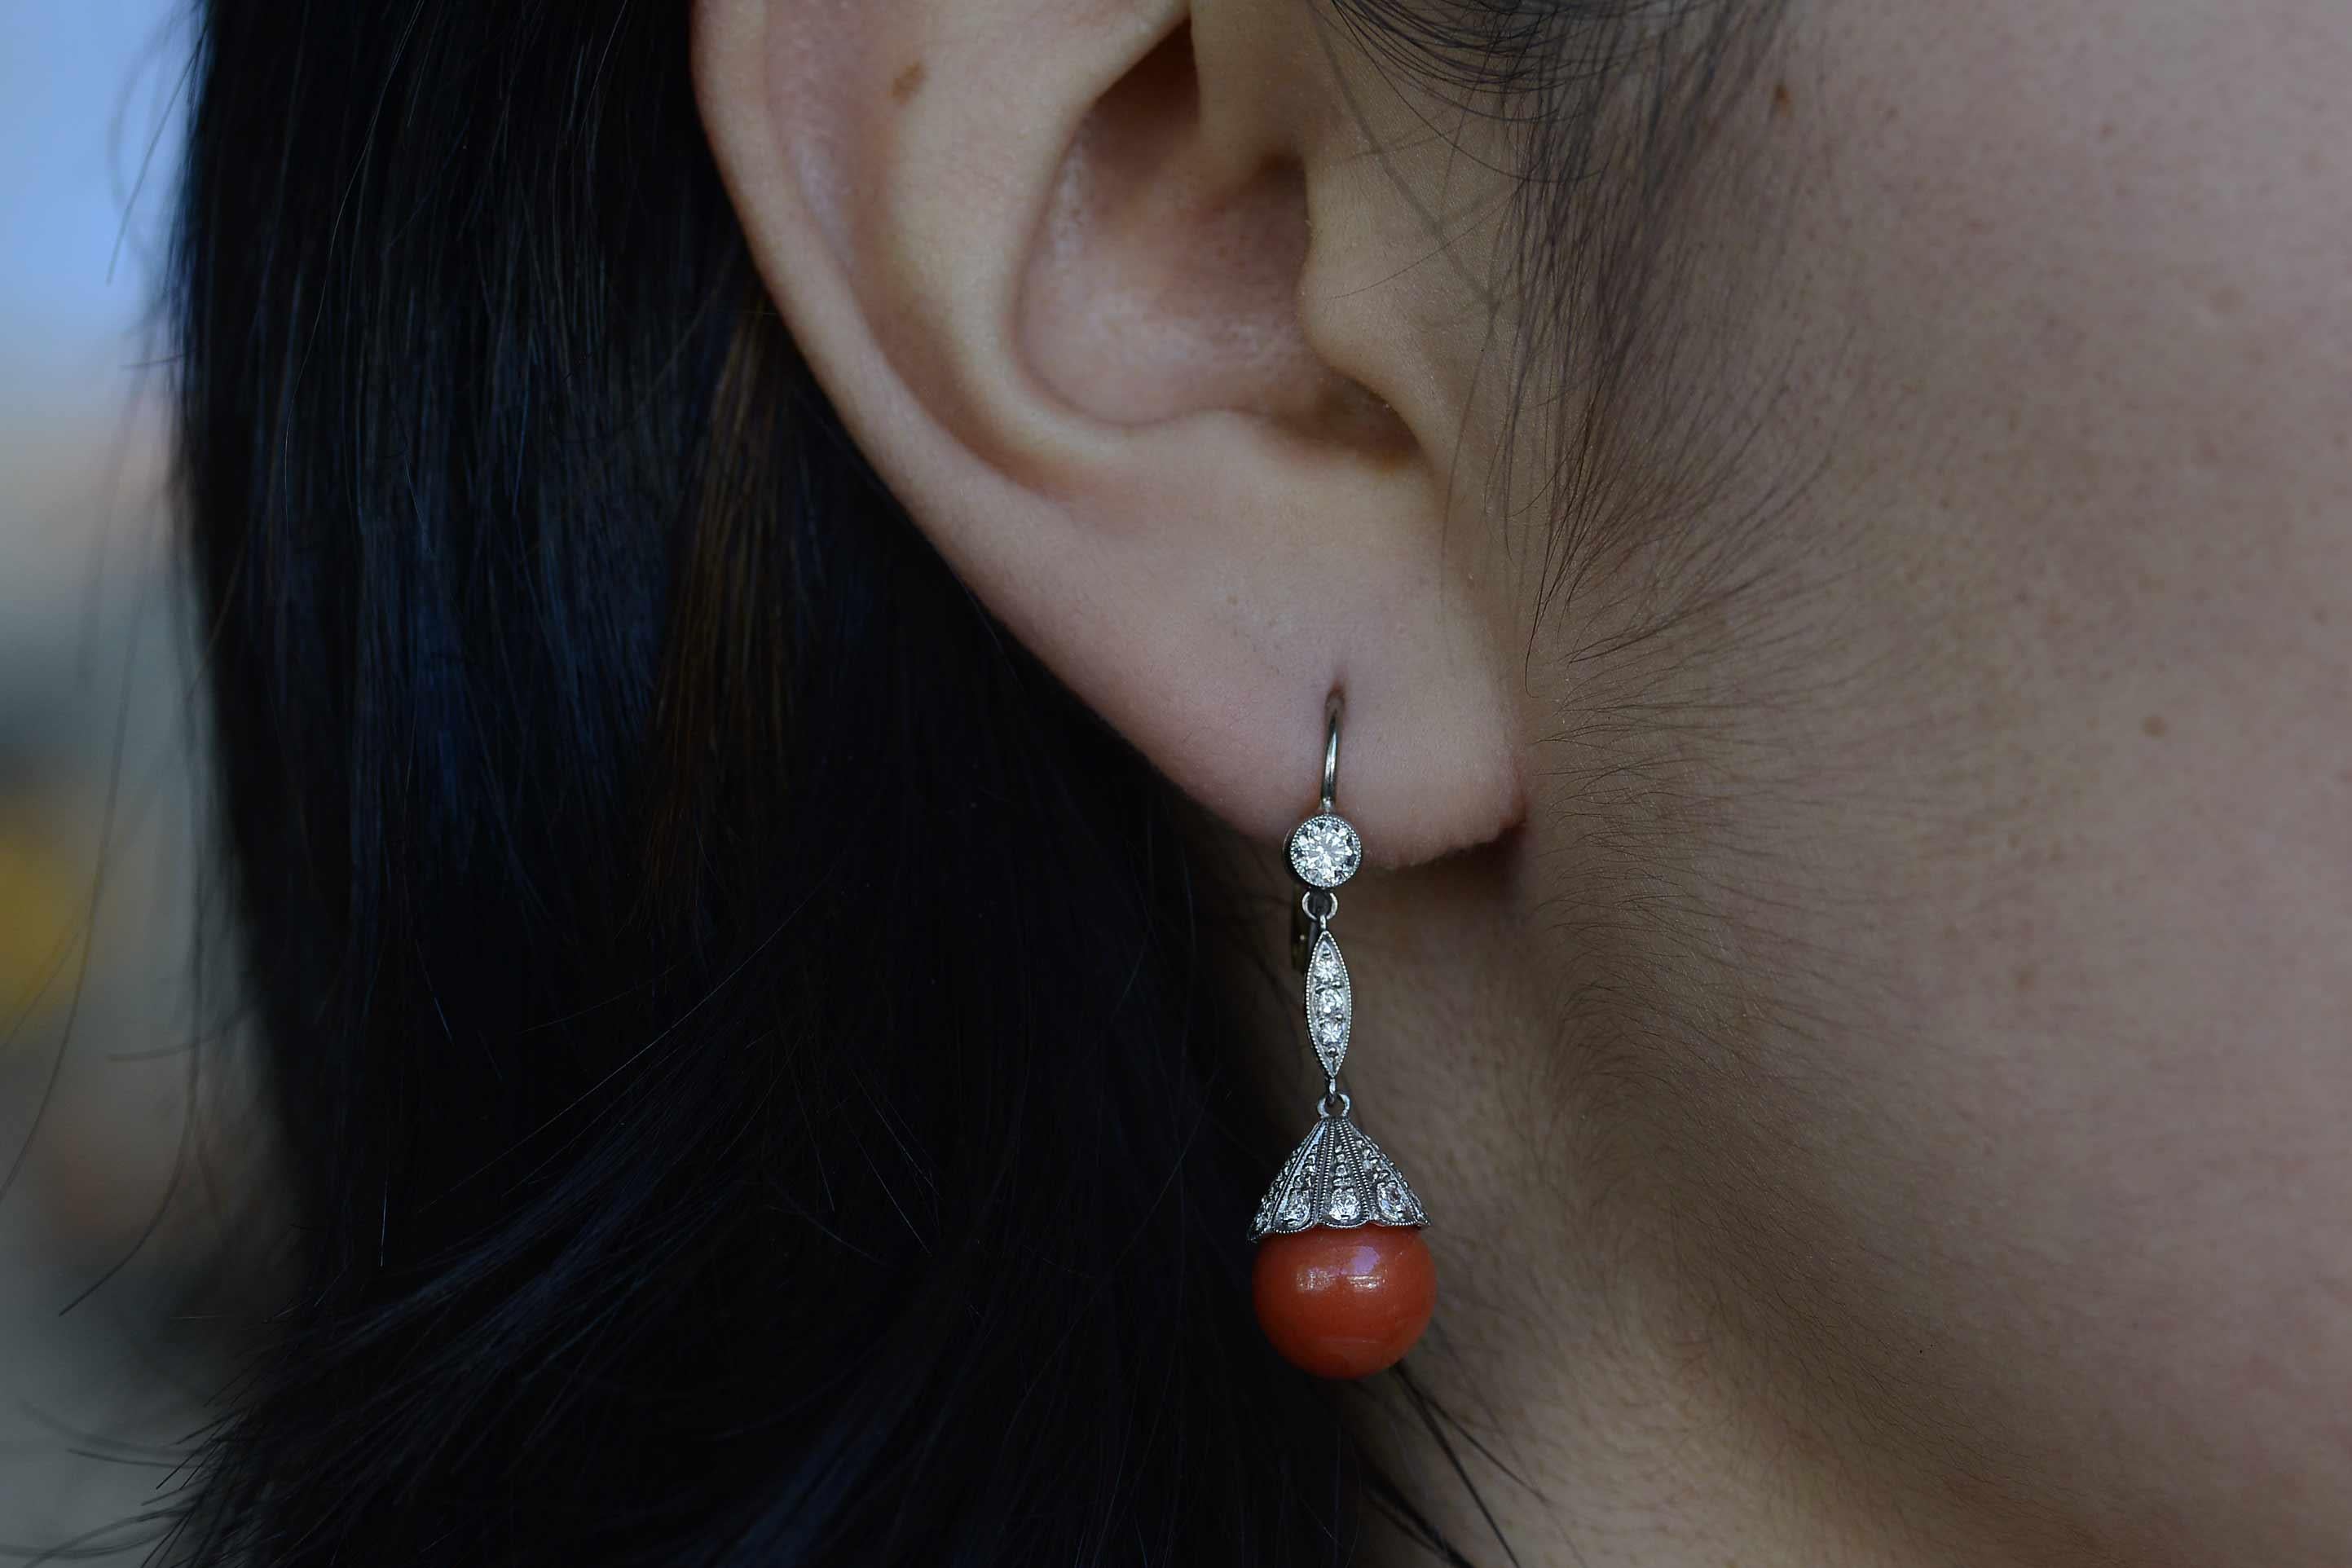 The Missoula Antique Earrings. The seductive red of these Art Deco Coral dangle earrings are sure to capture admiring glances as they sway so lithely with a long drop. The sizable 10mm spheres, topped with a pagoda like platinum and pave' diamond